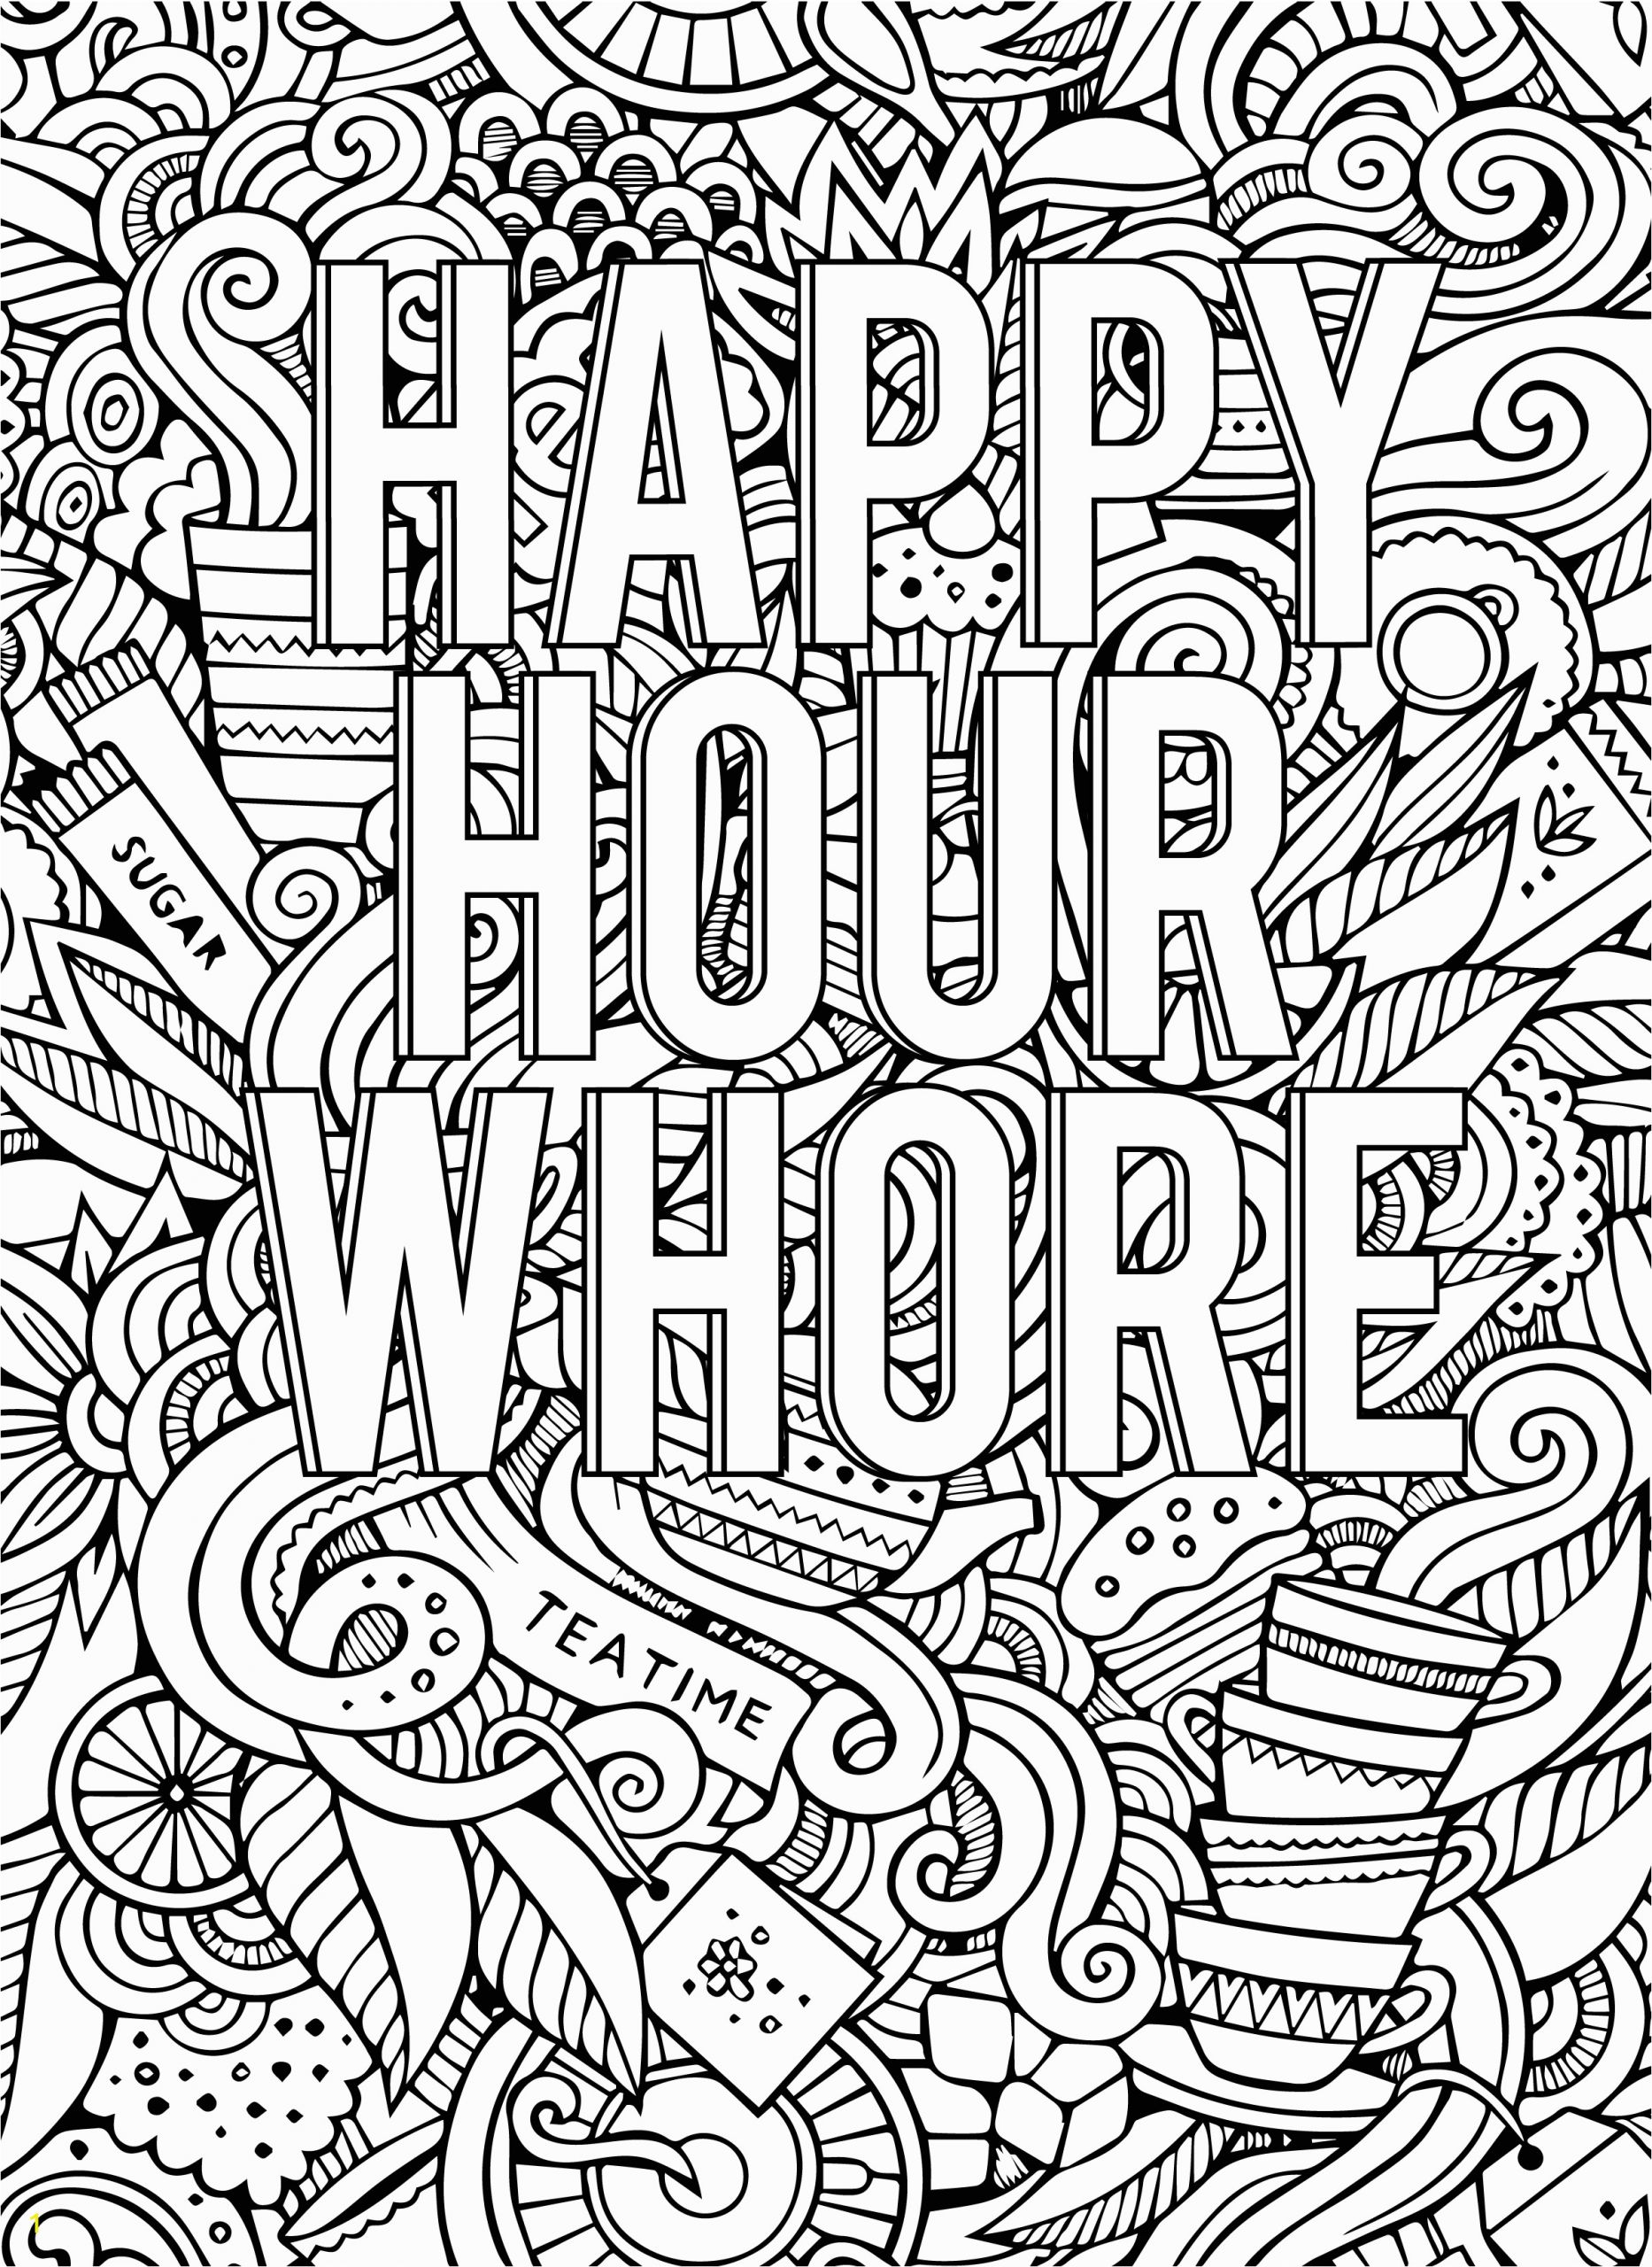 Free Printable Adult Swear Word Coloring Pages Cannabis Fantasy Cool Coloring Book Pages